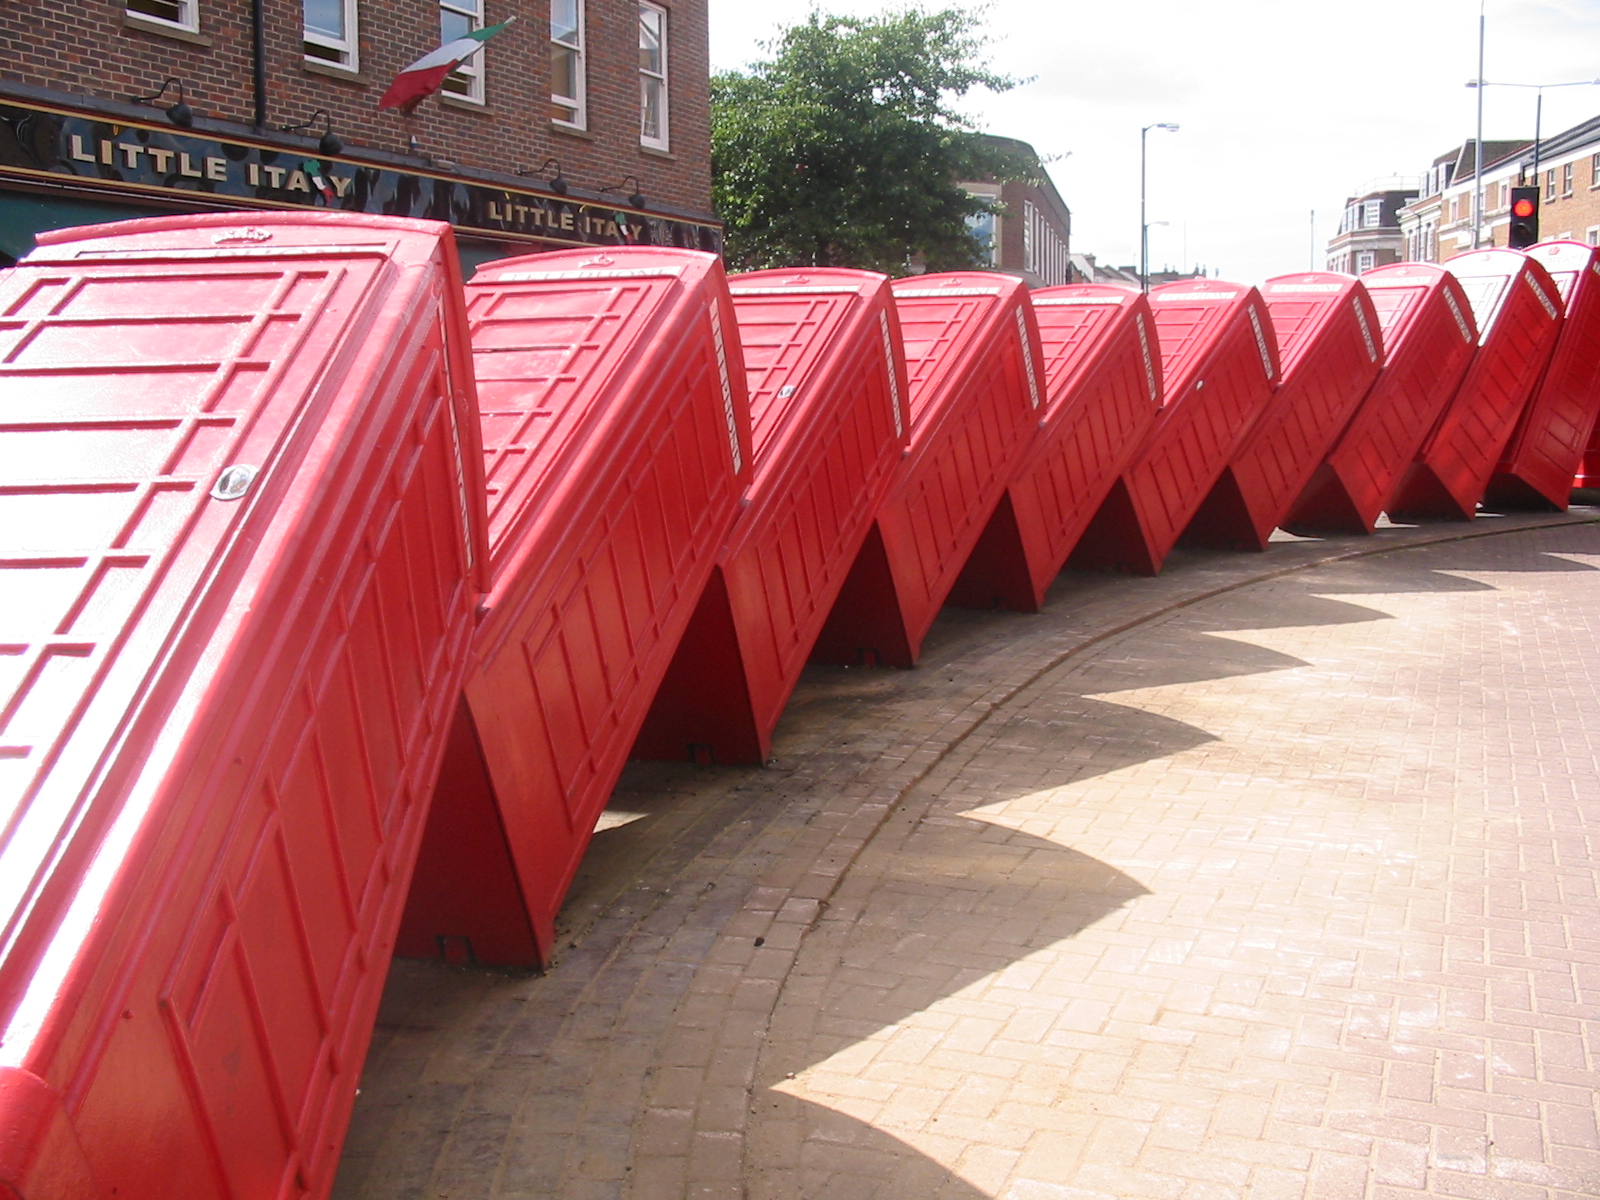 phoneboxes-phone-box-red-stacked-domino-in-London-Kingston-England-RF.jpg